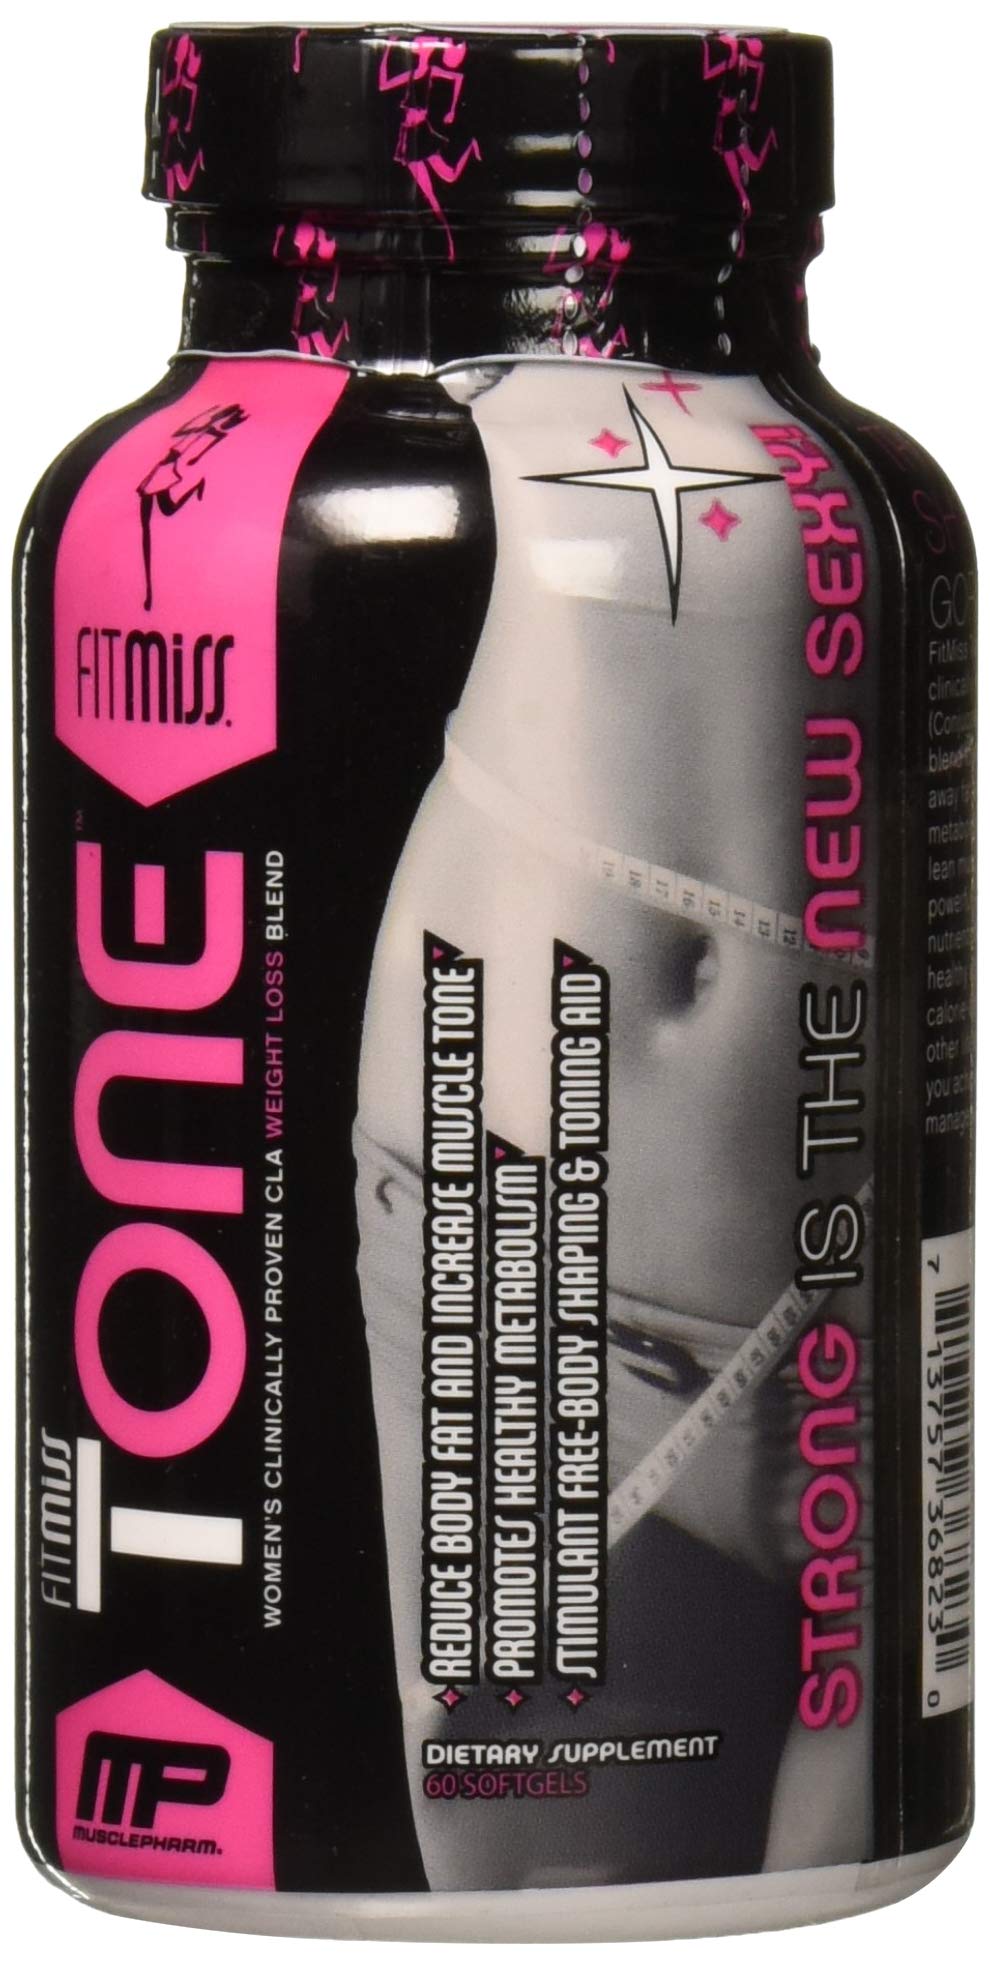 Book Cover FitMiss Tone, Women's STIMULANT FREE & Mid-Section Fat Metabolizer, Helps Reduce Body Fat, Softgels, 60 Servings